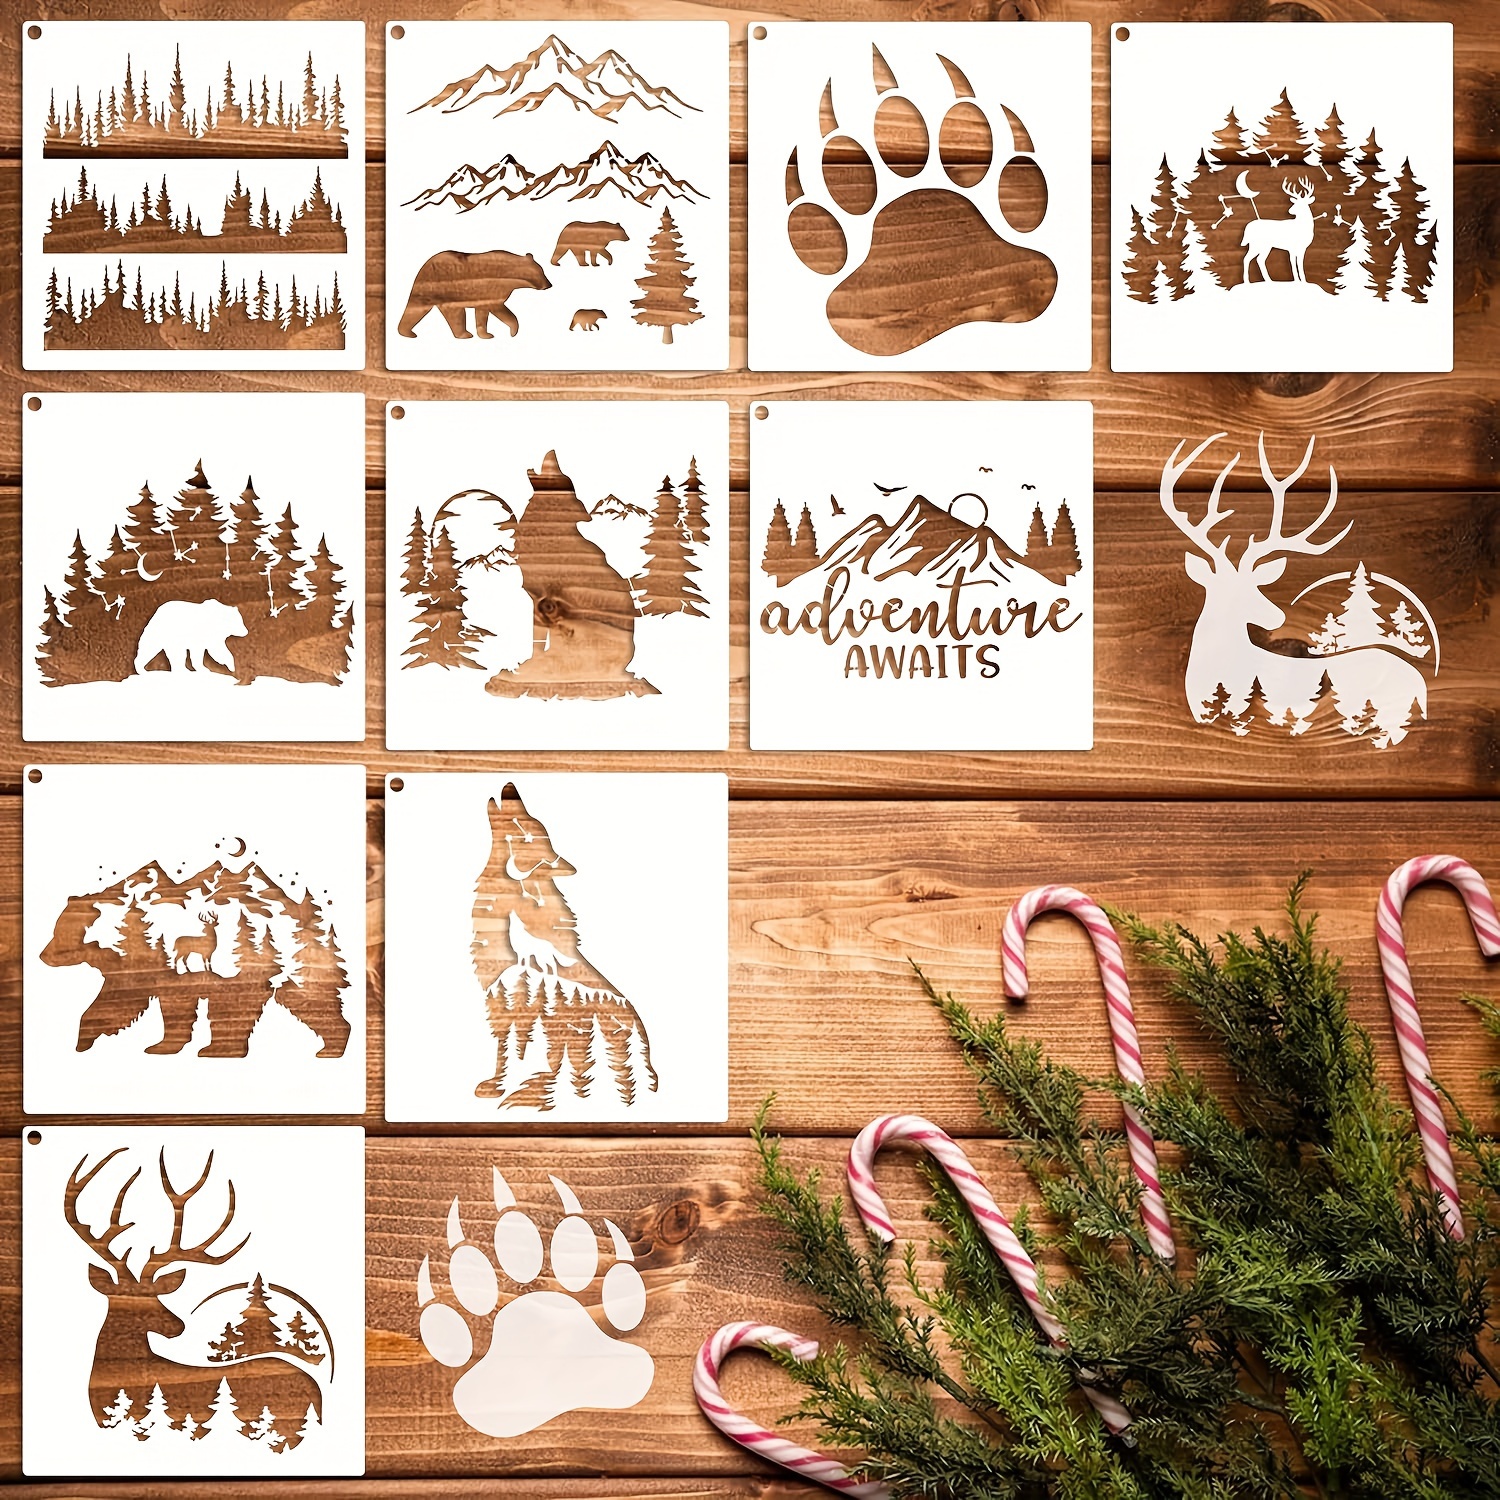 11 Pcs Deer Stencils Forest Mountain Tree Deer Head Stencils for Wood  Burning Stencil Template Stencils for Painting on Wood Crafts Home Decors  (Deer)